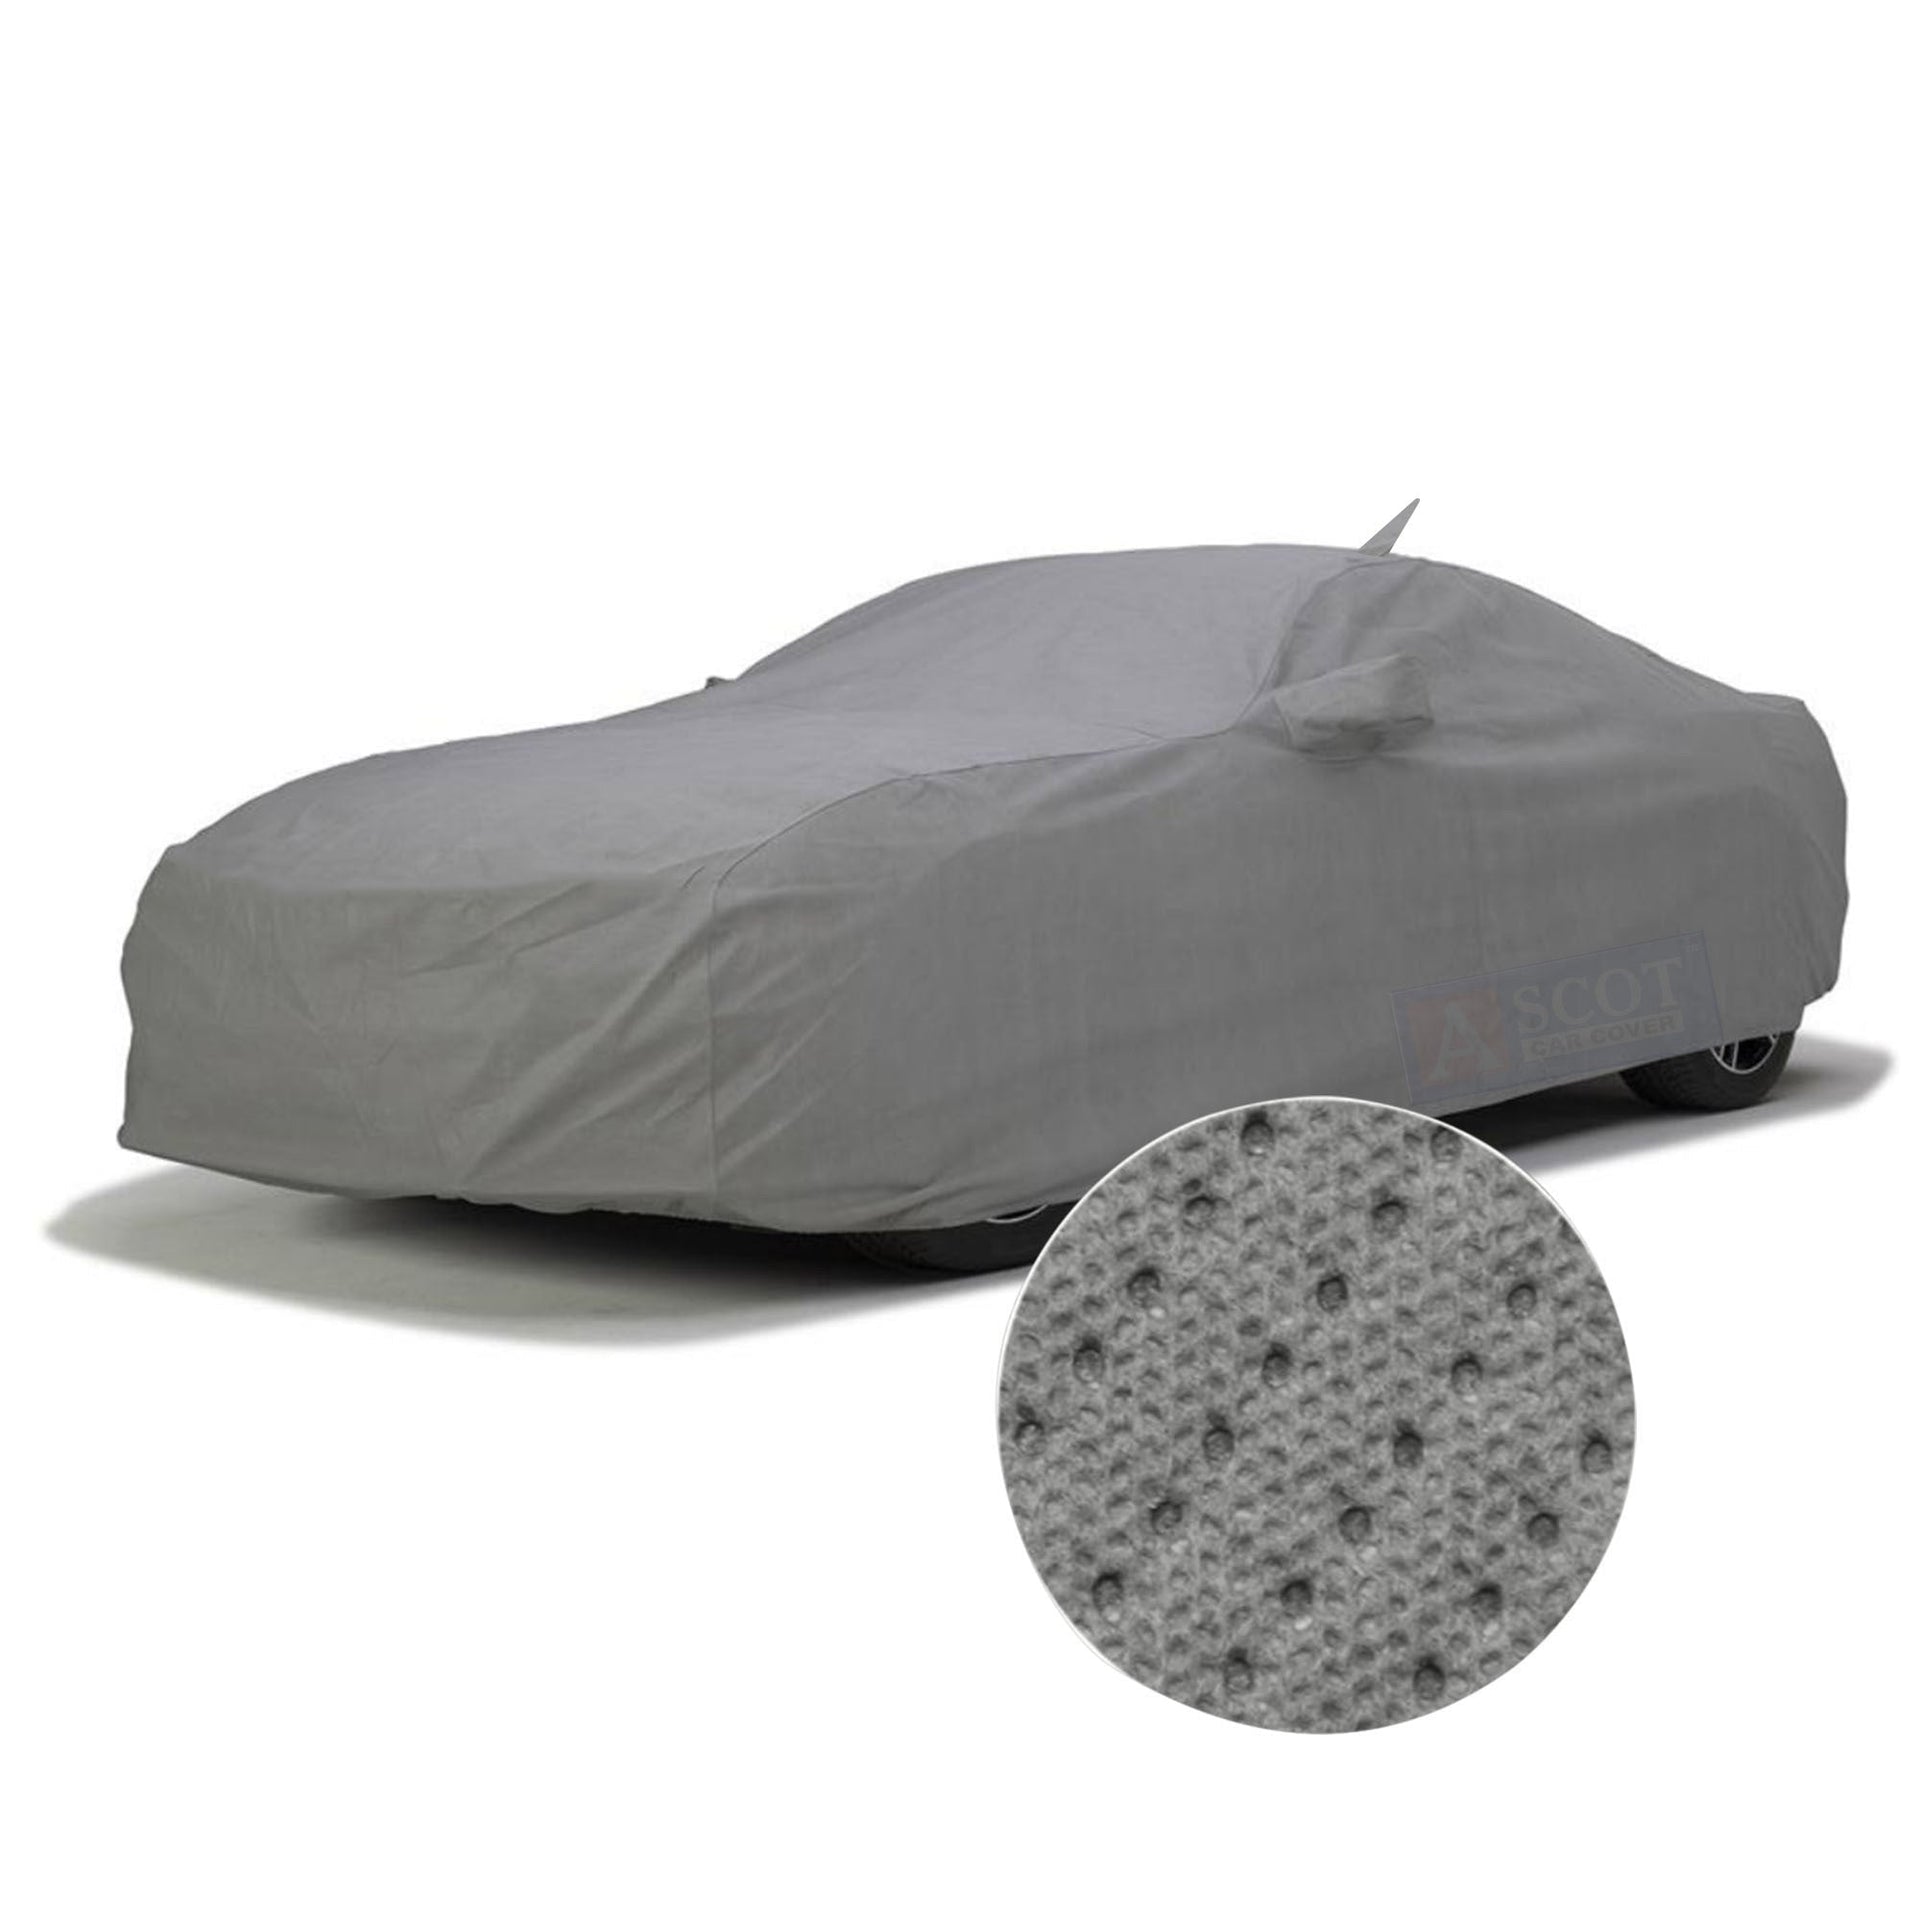 Buy BMW 7 Series 2009-2023 PVC Spark Cotton Fabric Car Top Cover in  Pakistan